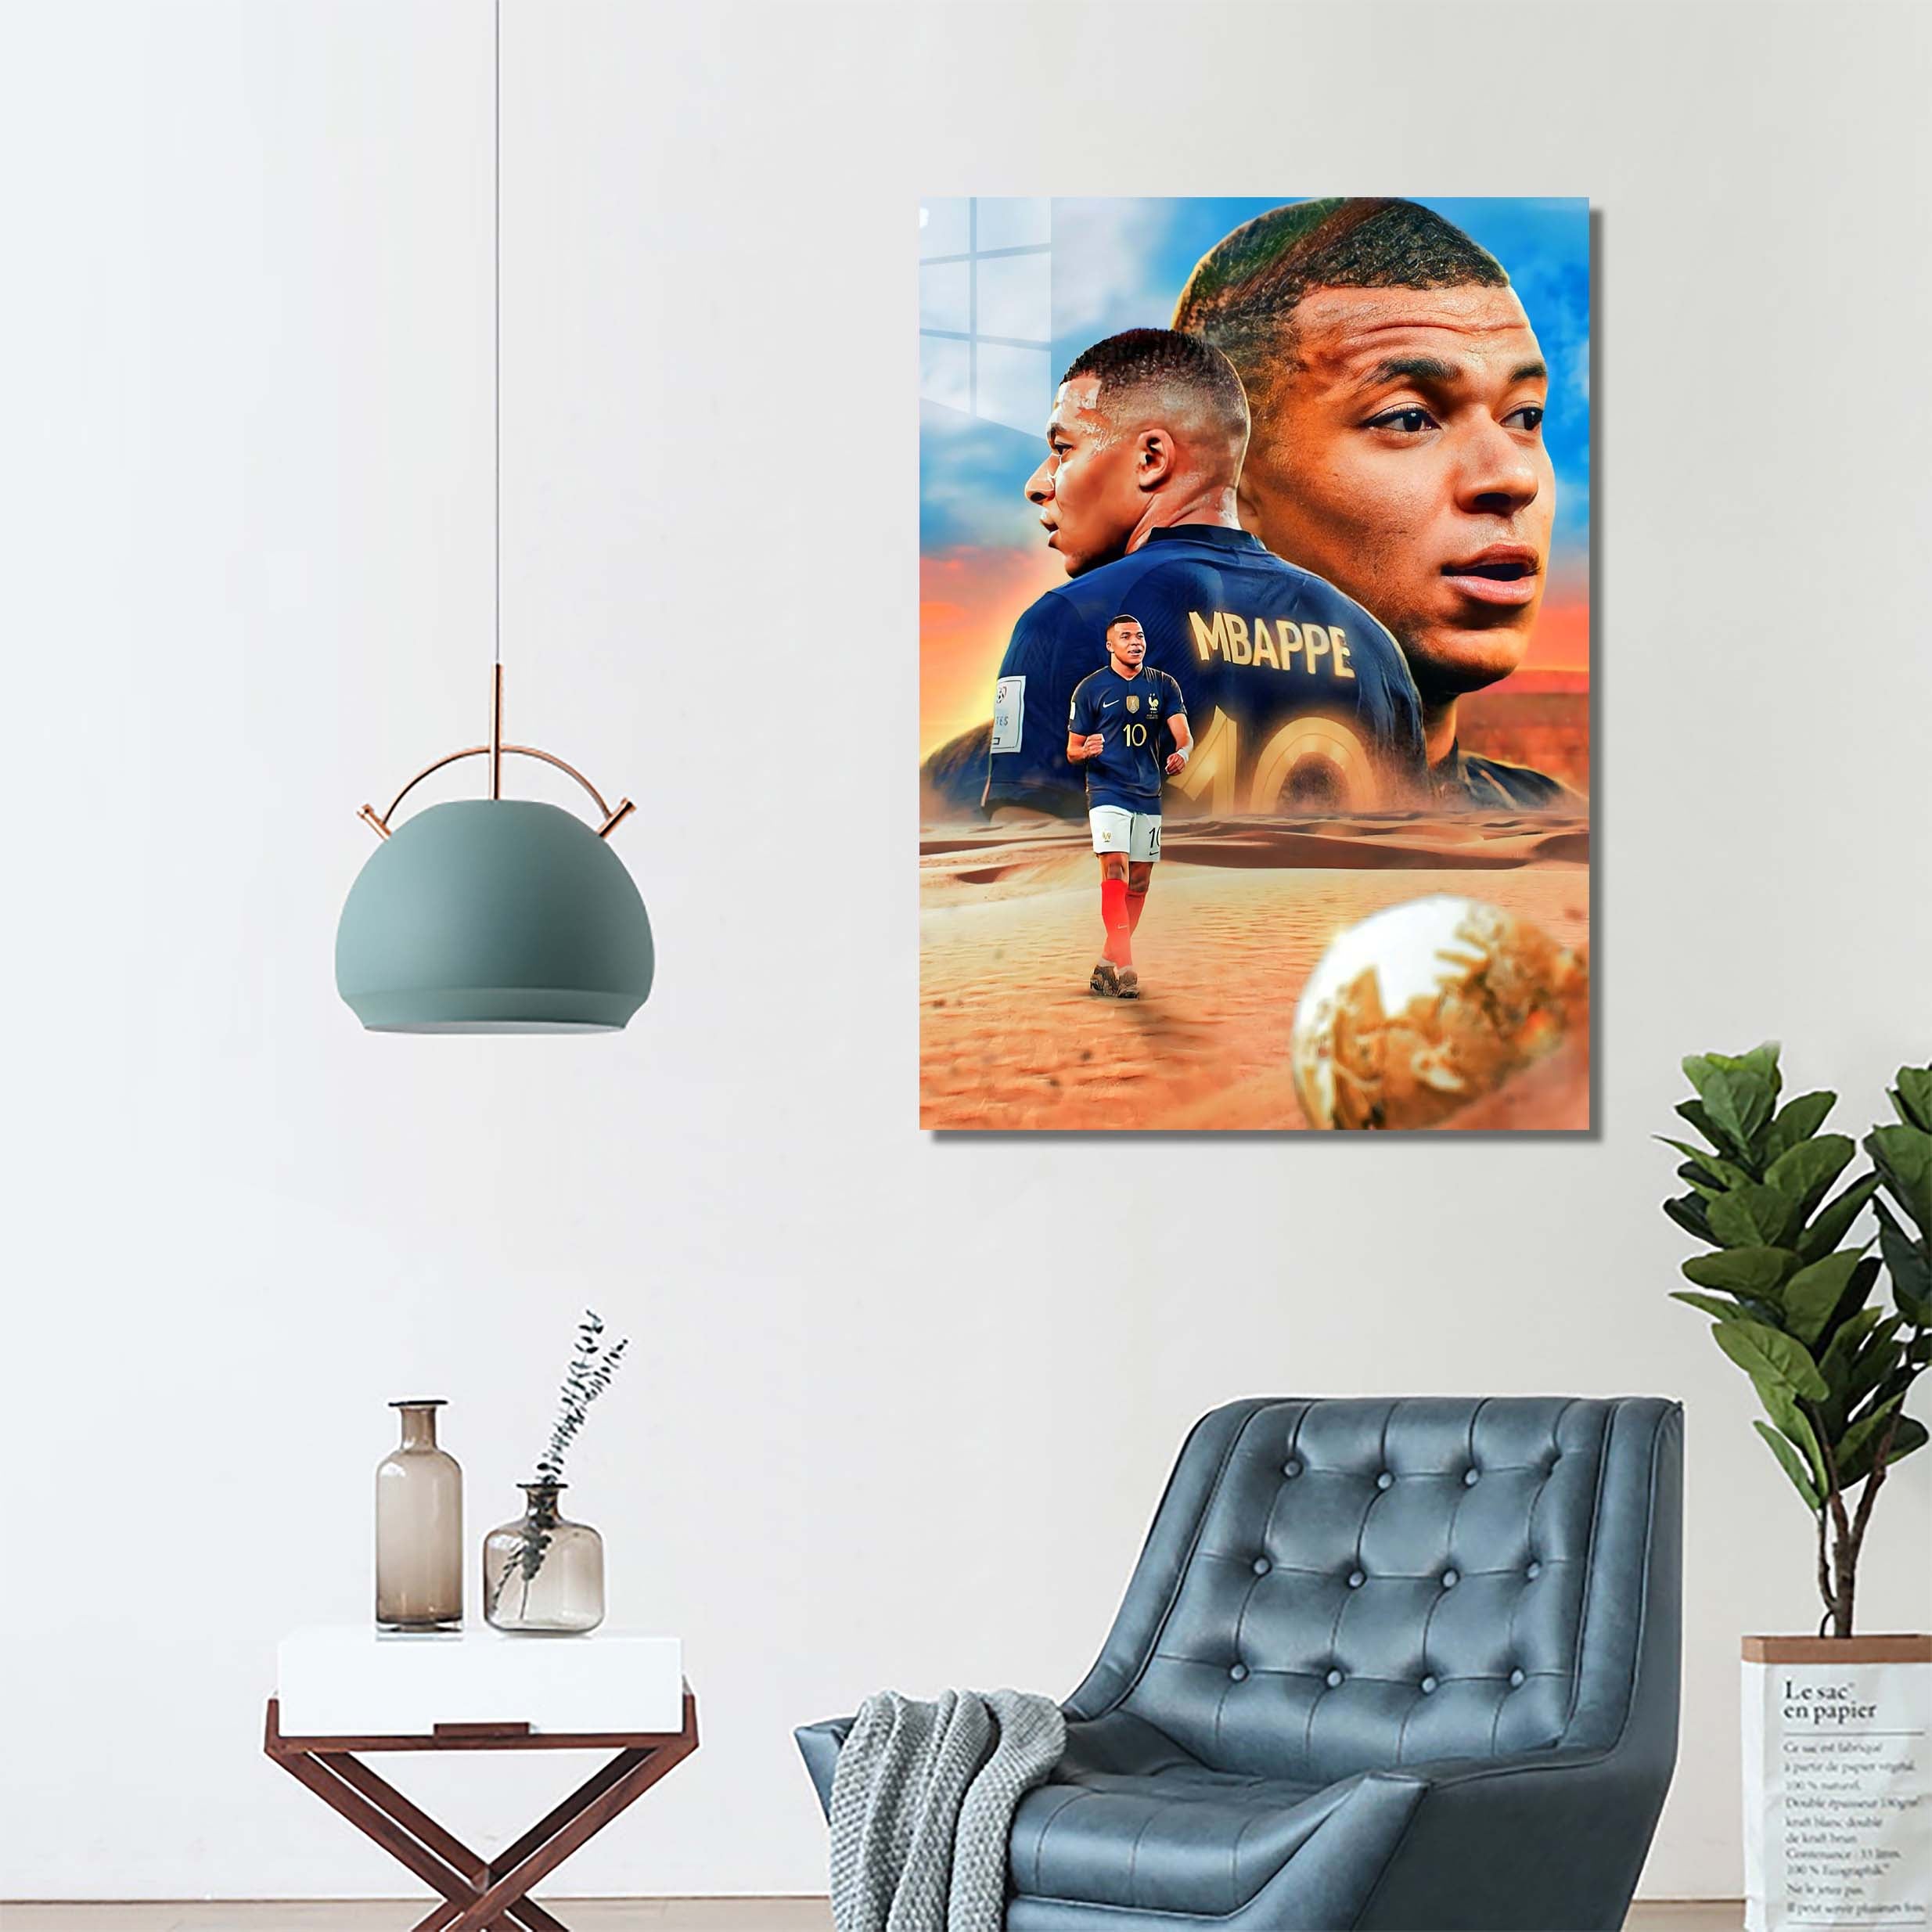 Mbappe 10-designed by @My Kido Art